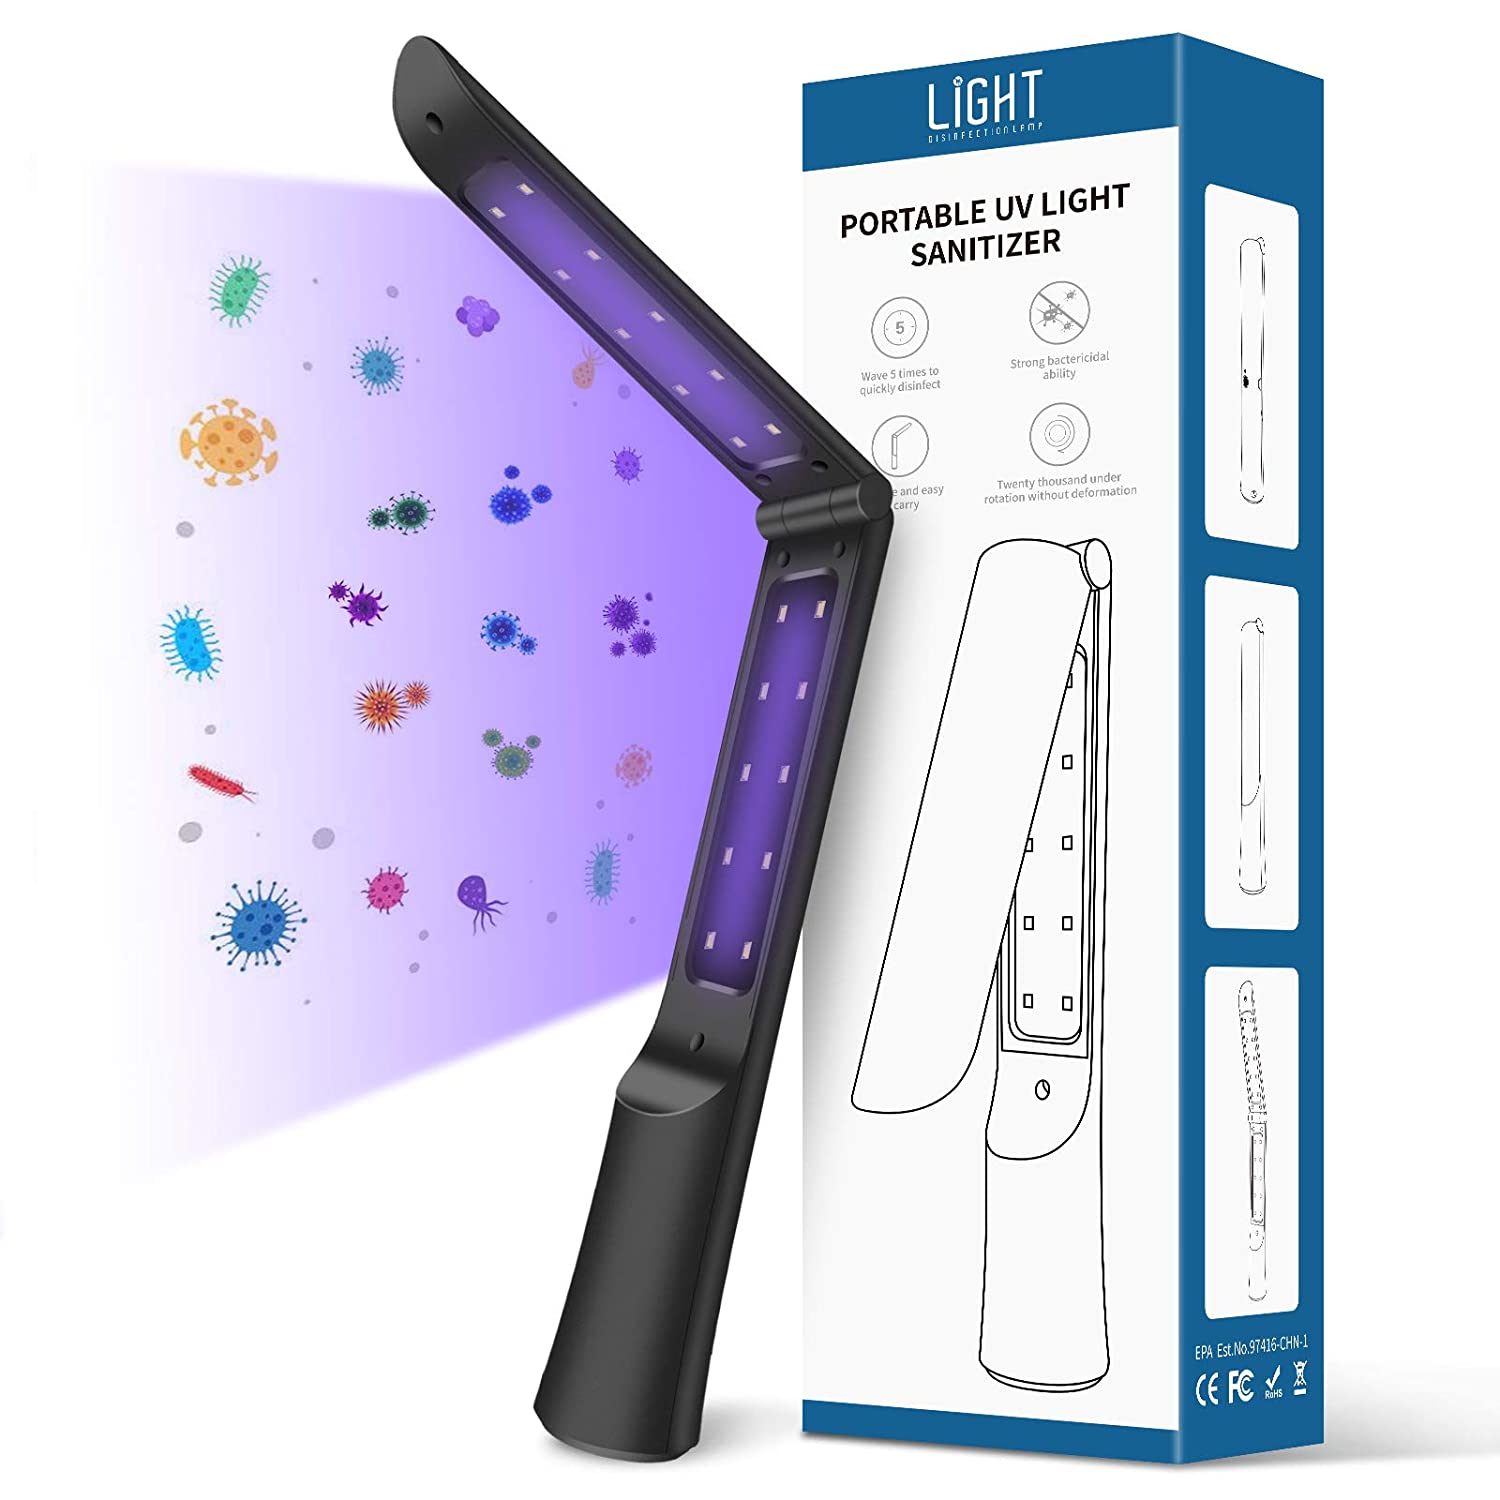 UV Light Sanitizer Wand, VNOOKY Handheld Foldable UVC Disinfection Light, Portable UV Sterilizer Lamp for Masks, Pets, Household, Toilet, Kitchen, Room, Car, Office, Hotel, Travel and more(Bl - Home Decor Gifts and More